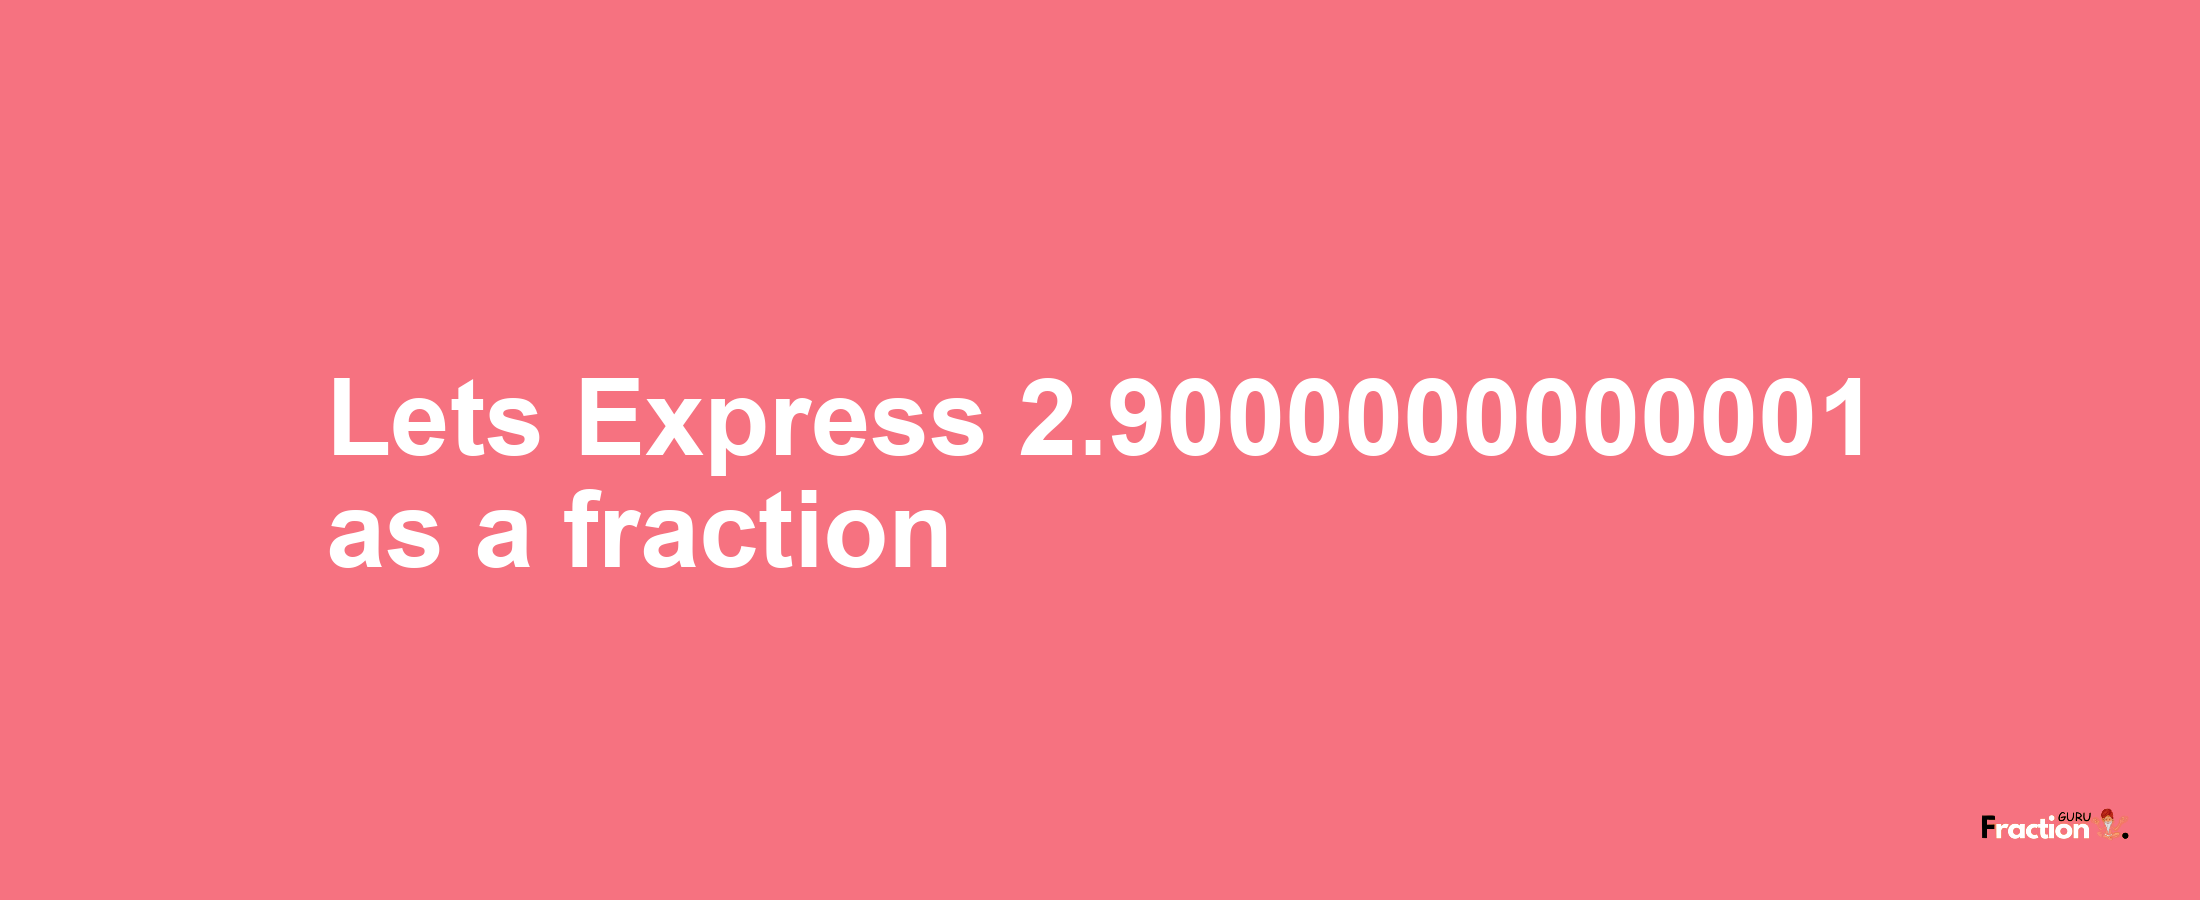 Lets Express 2.9000000000001 as afraction